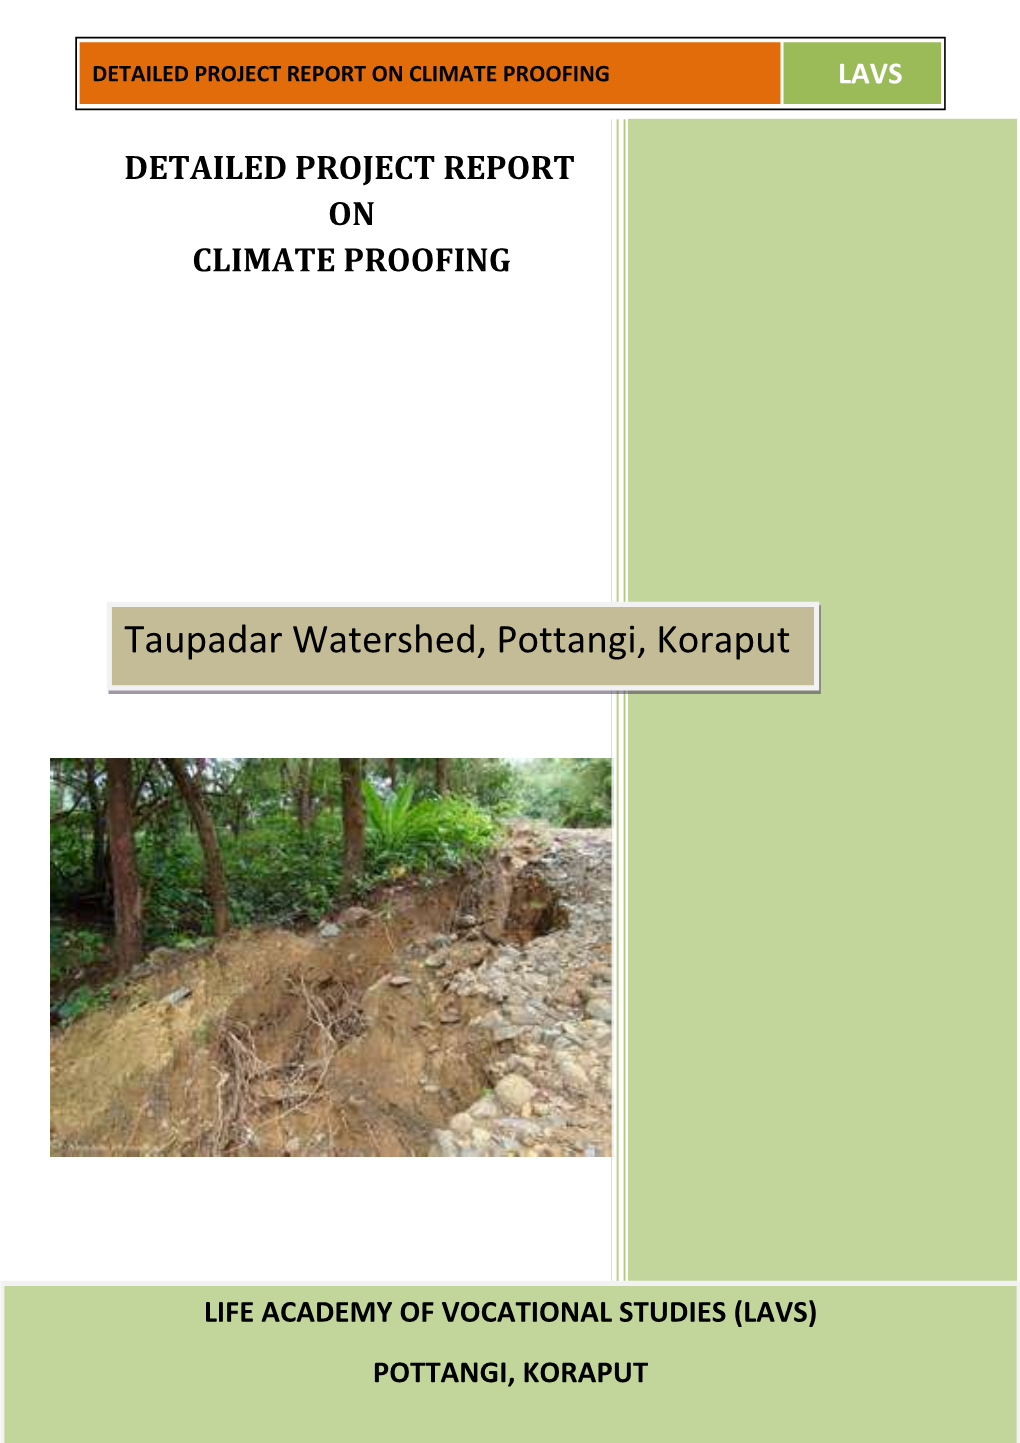 Detailed Project Report on Climate Proofing Lavs